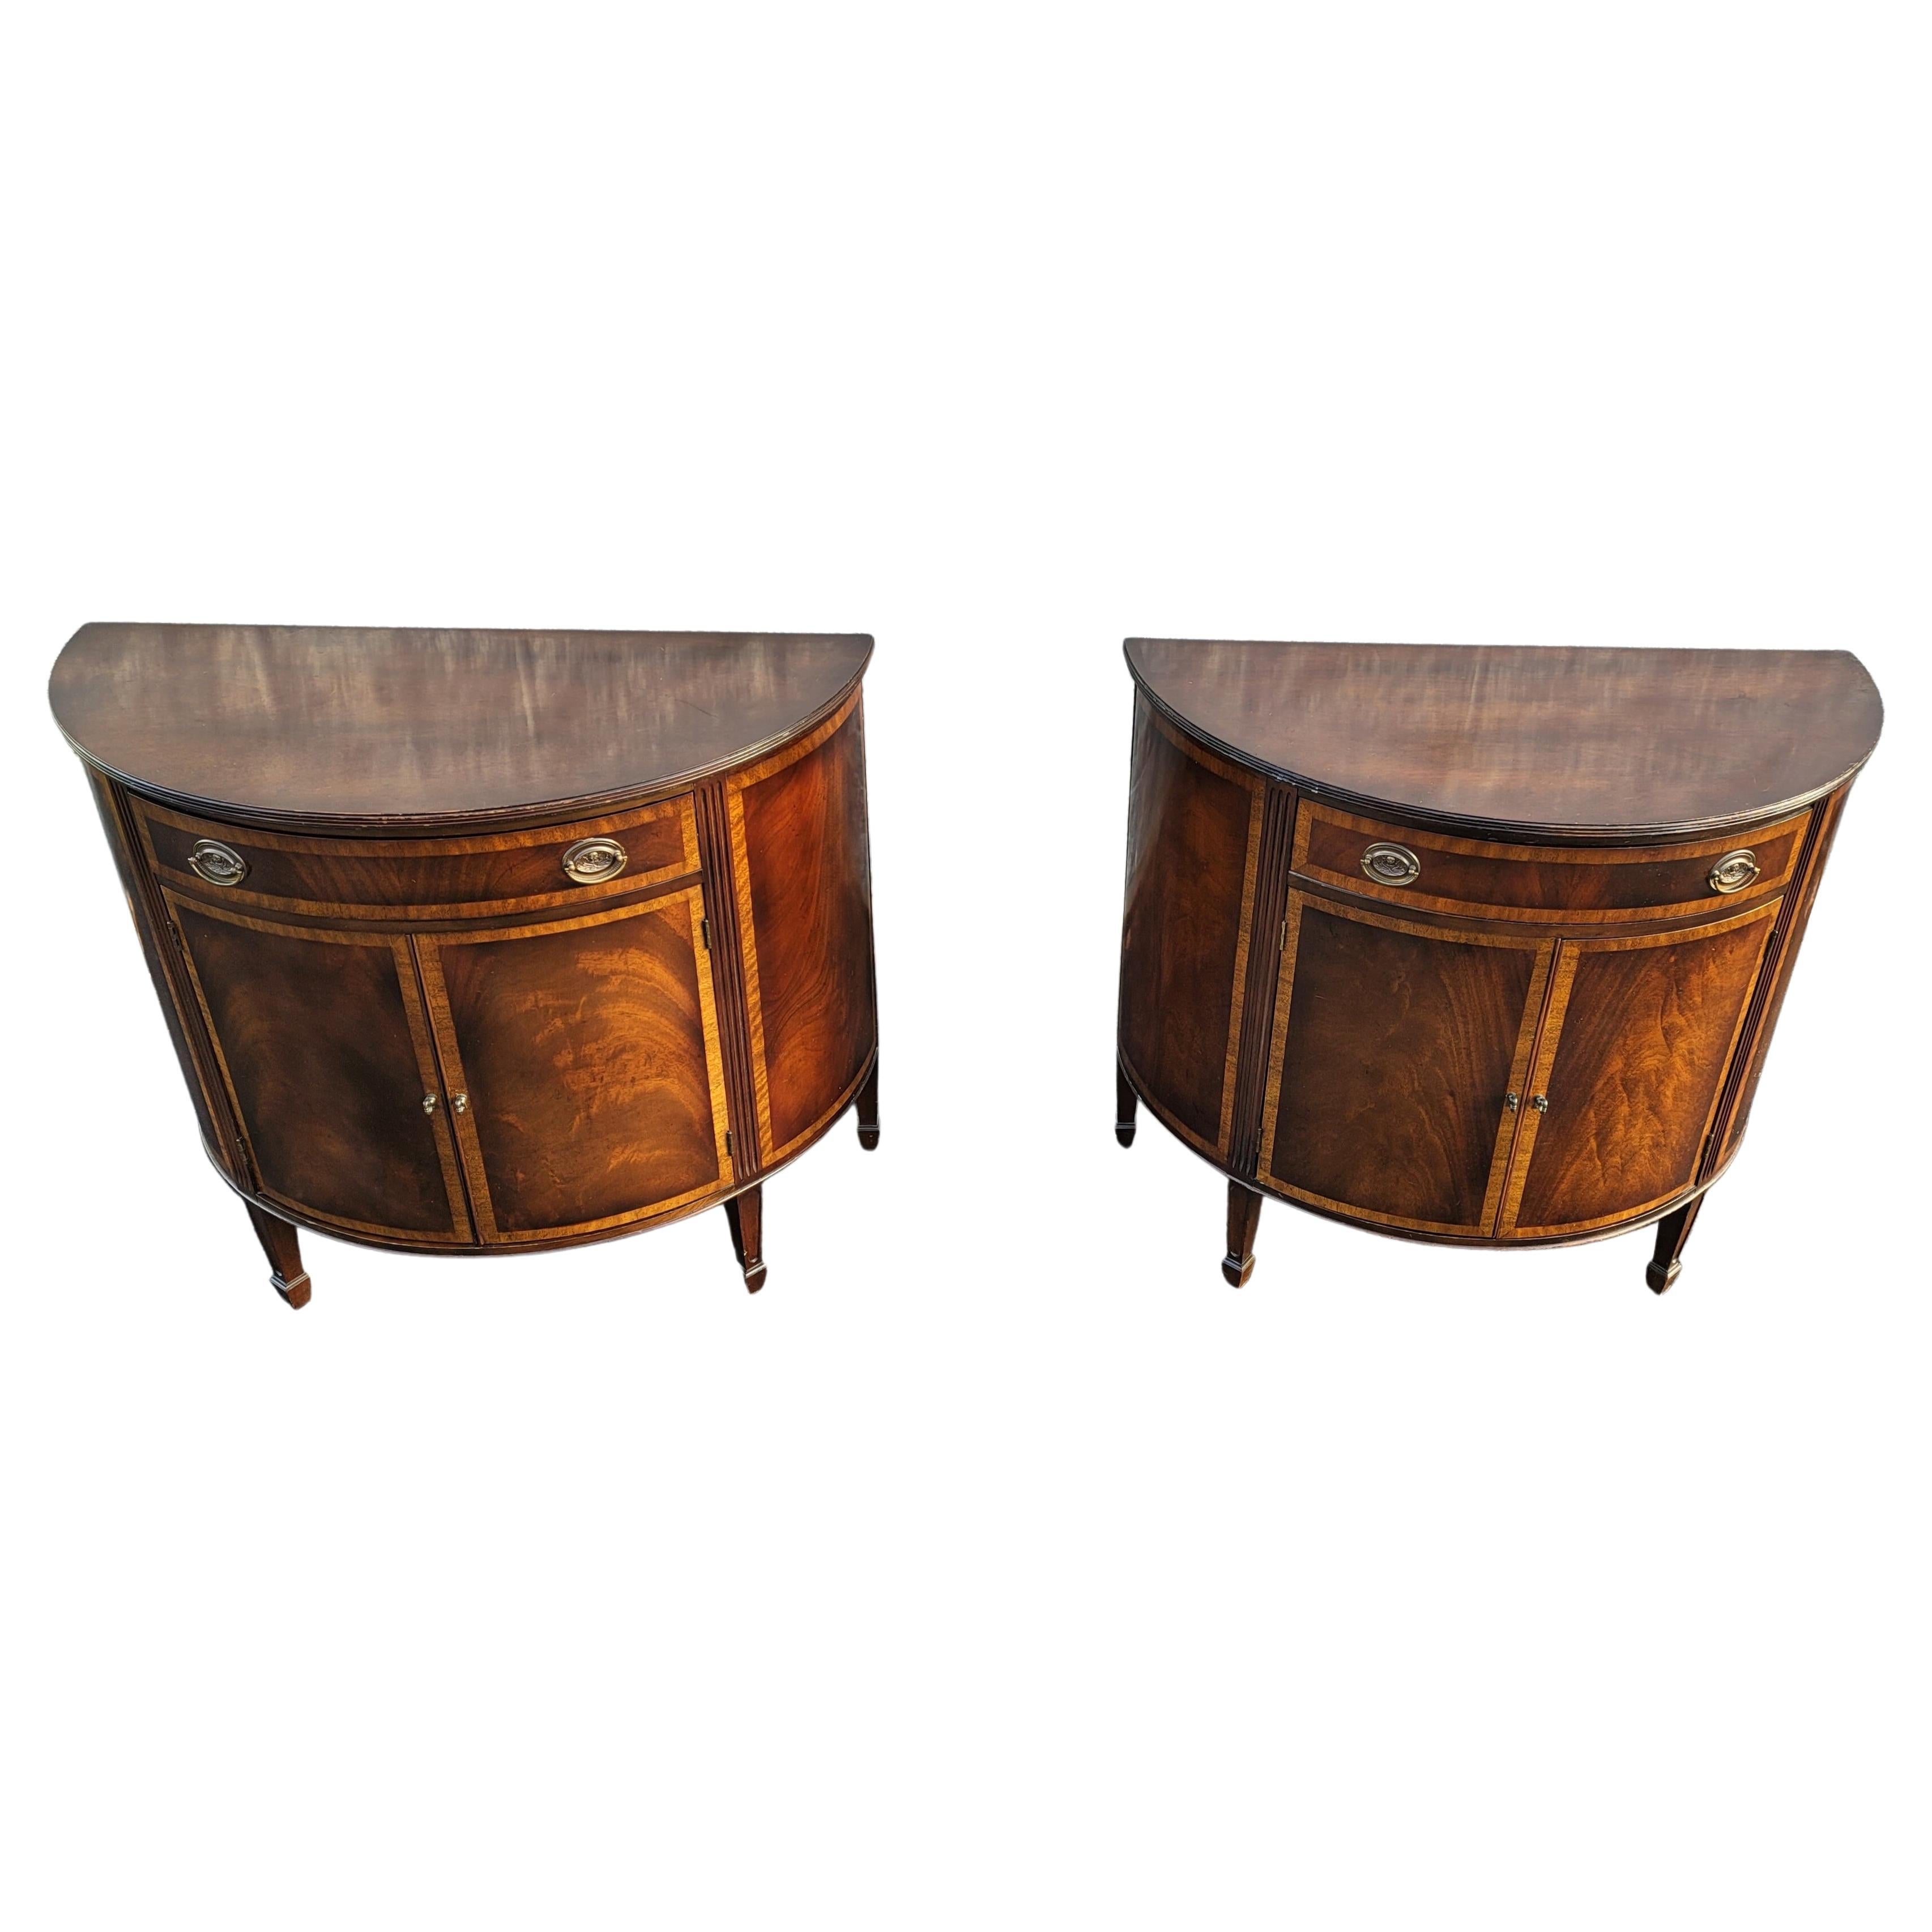 Veneer Mid-19th Centruty George III Demilune Banded Flame Mahogany Commodes Cabinets